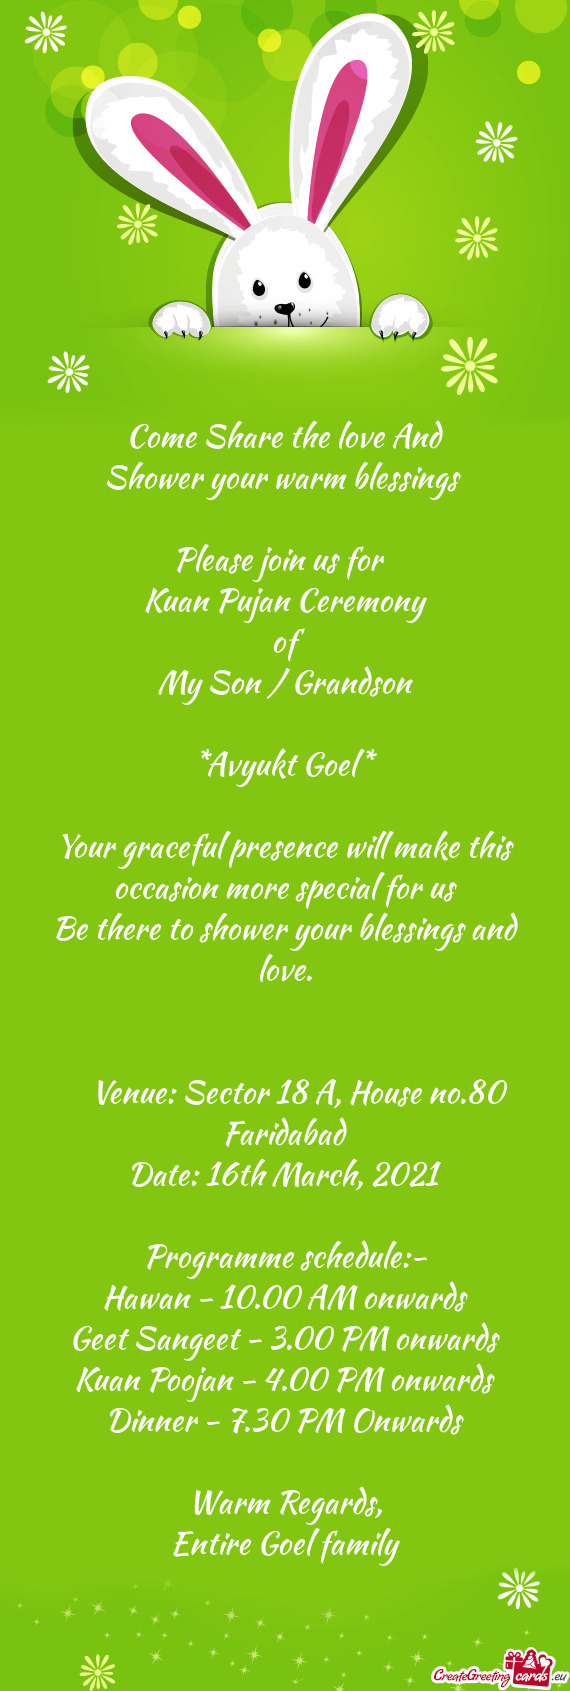 Your graceful presence will make this occasion more special for us